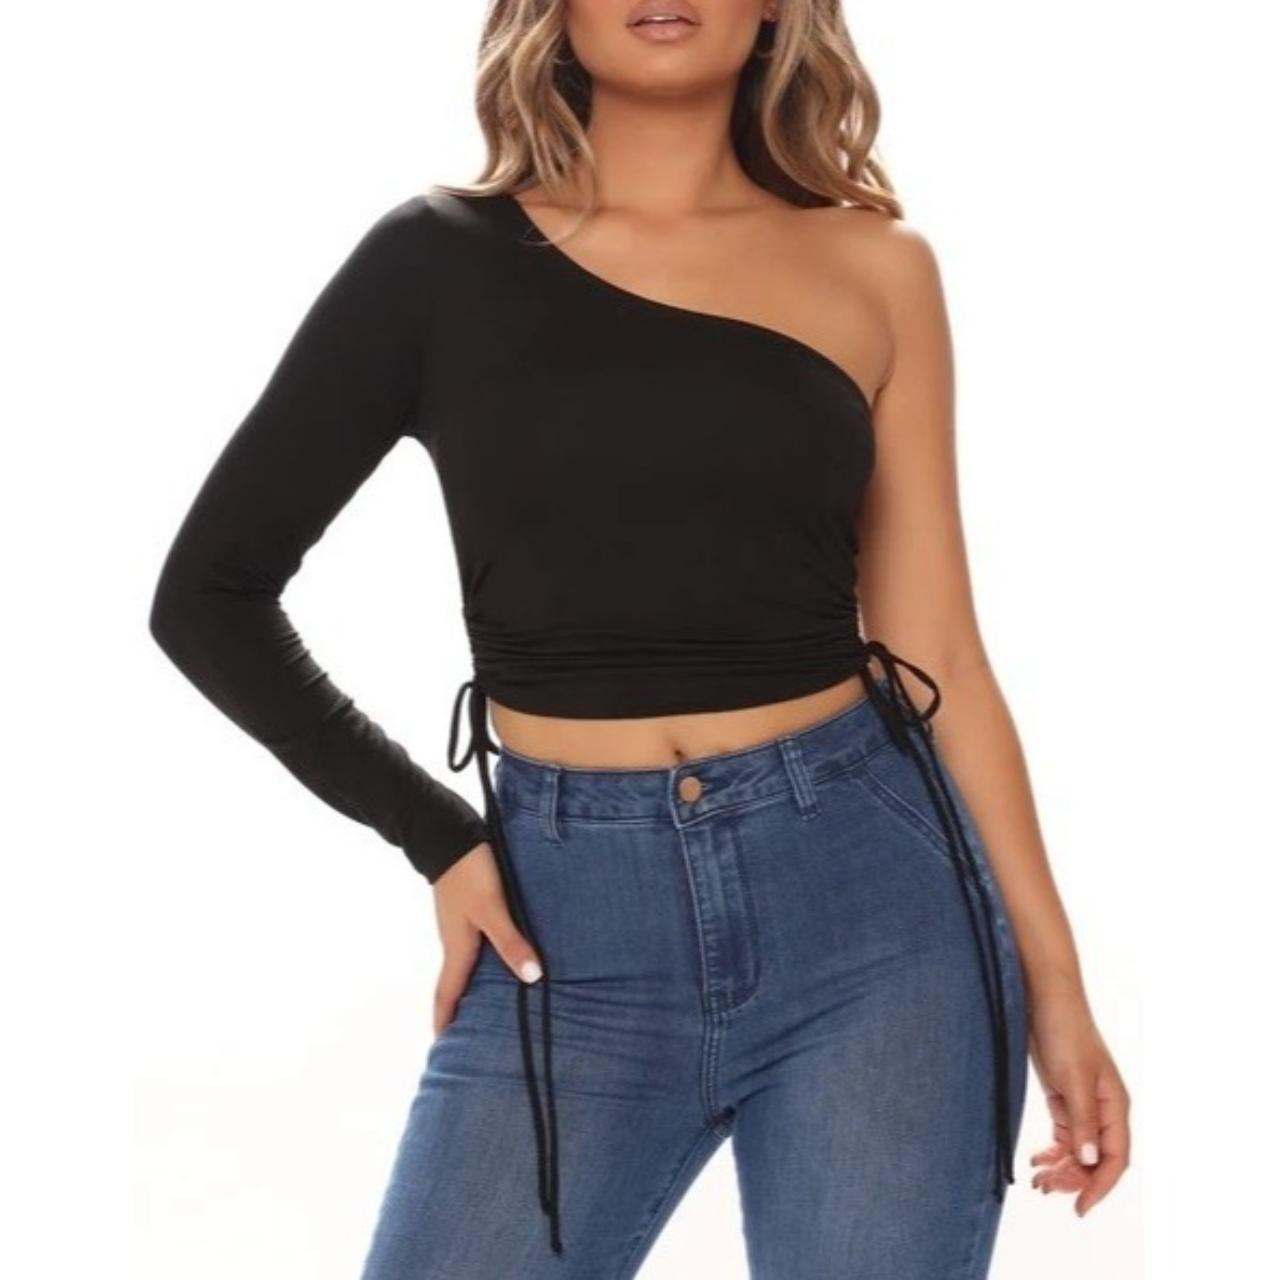 Ambiance Apparel Black and Pink Crop Top Size S